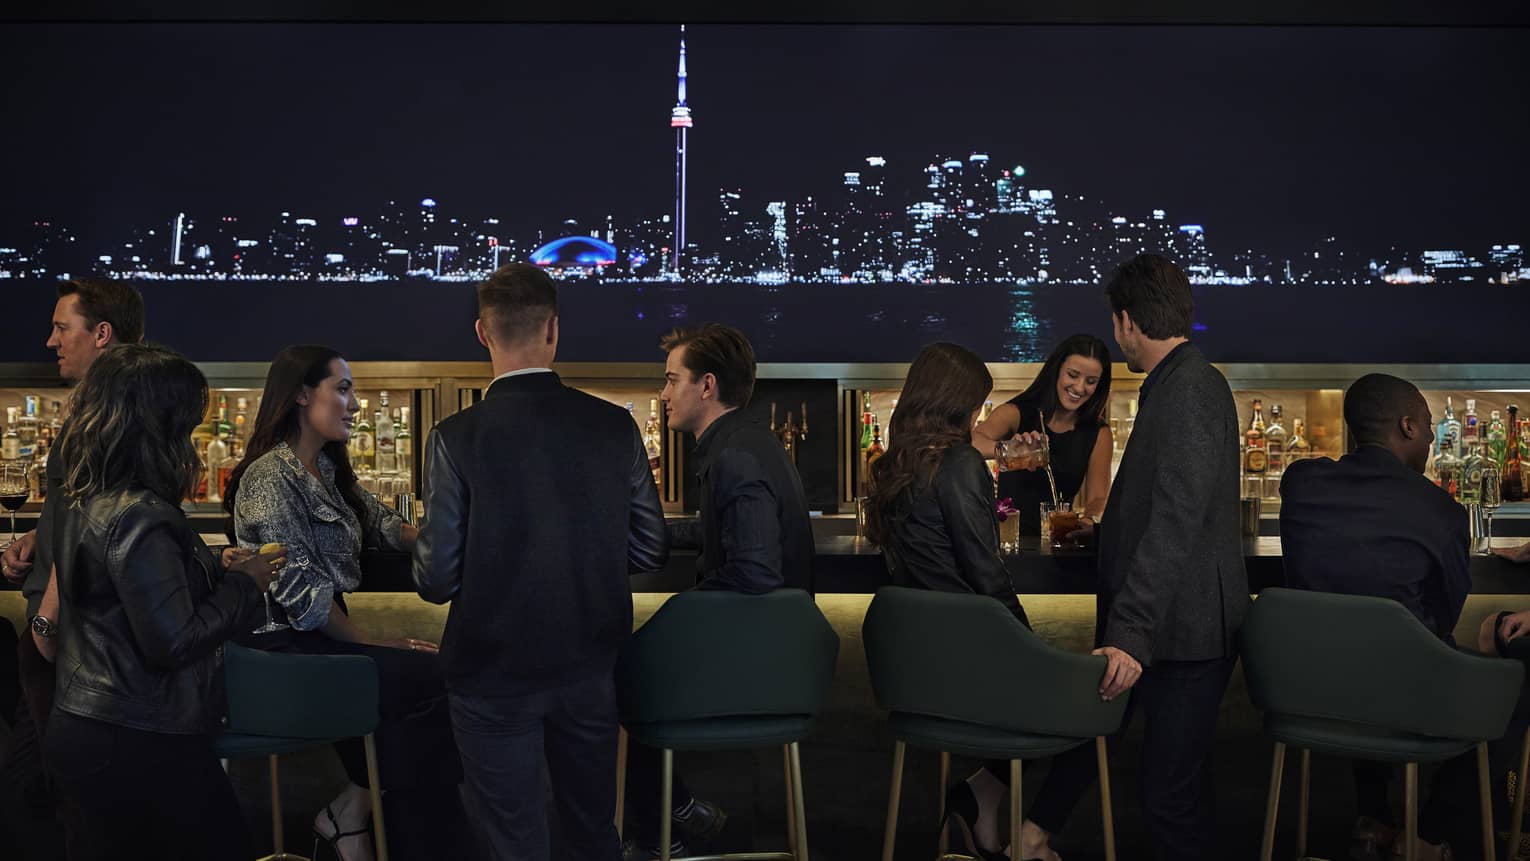 A lit up skyline of the city illuminate the bar, where guests sit and enjoy drinks